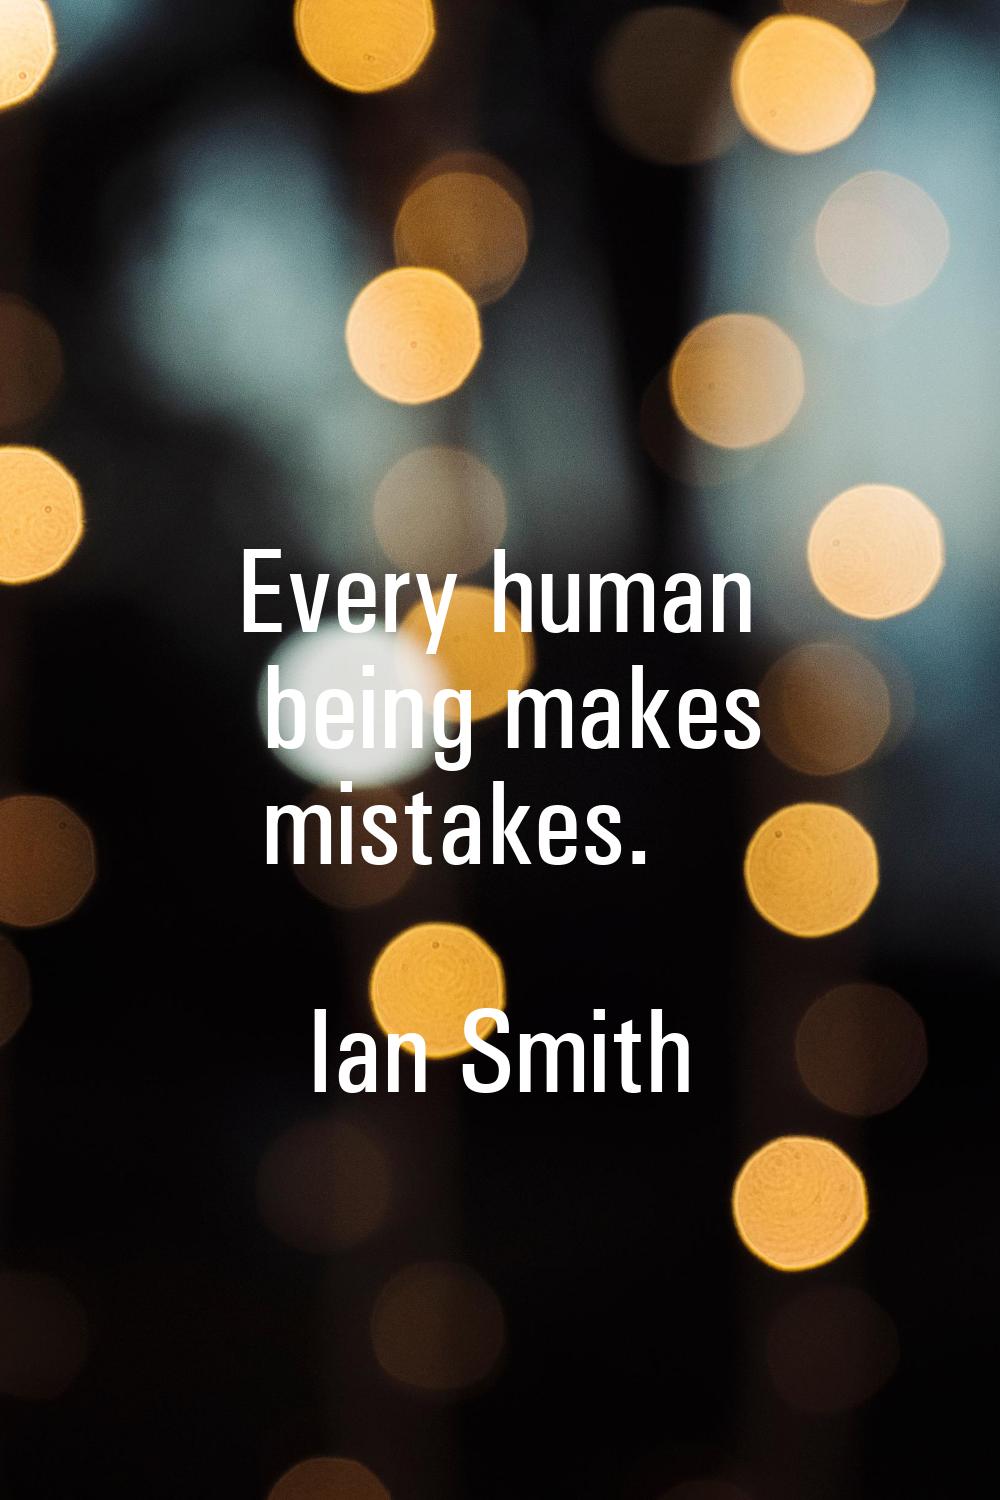 Every human being makes mistakes.